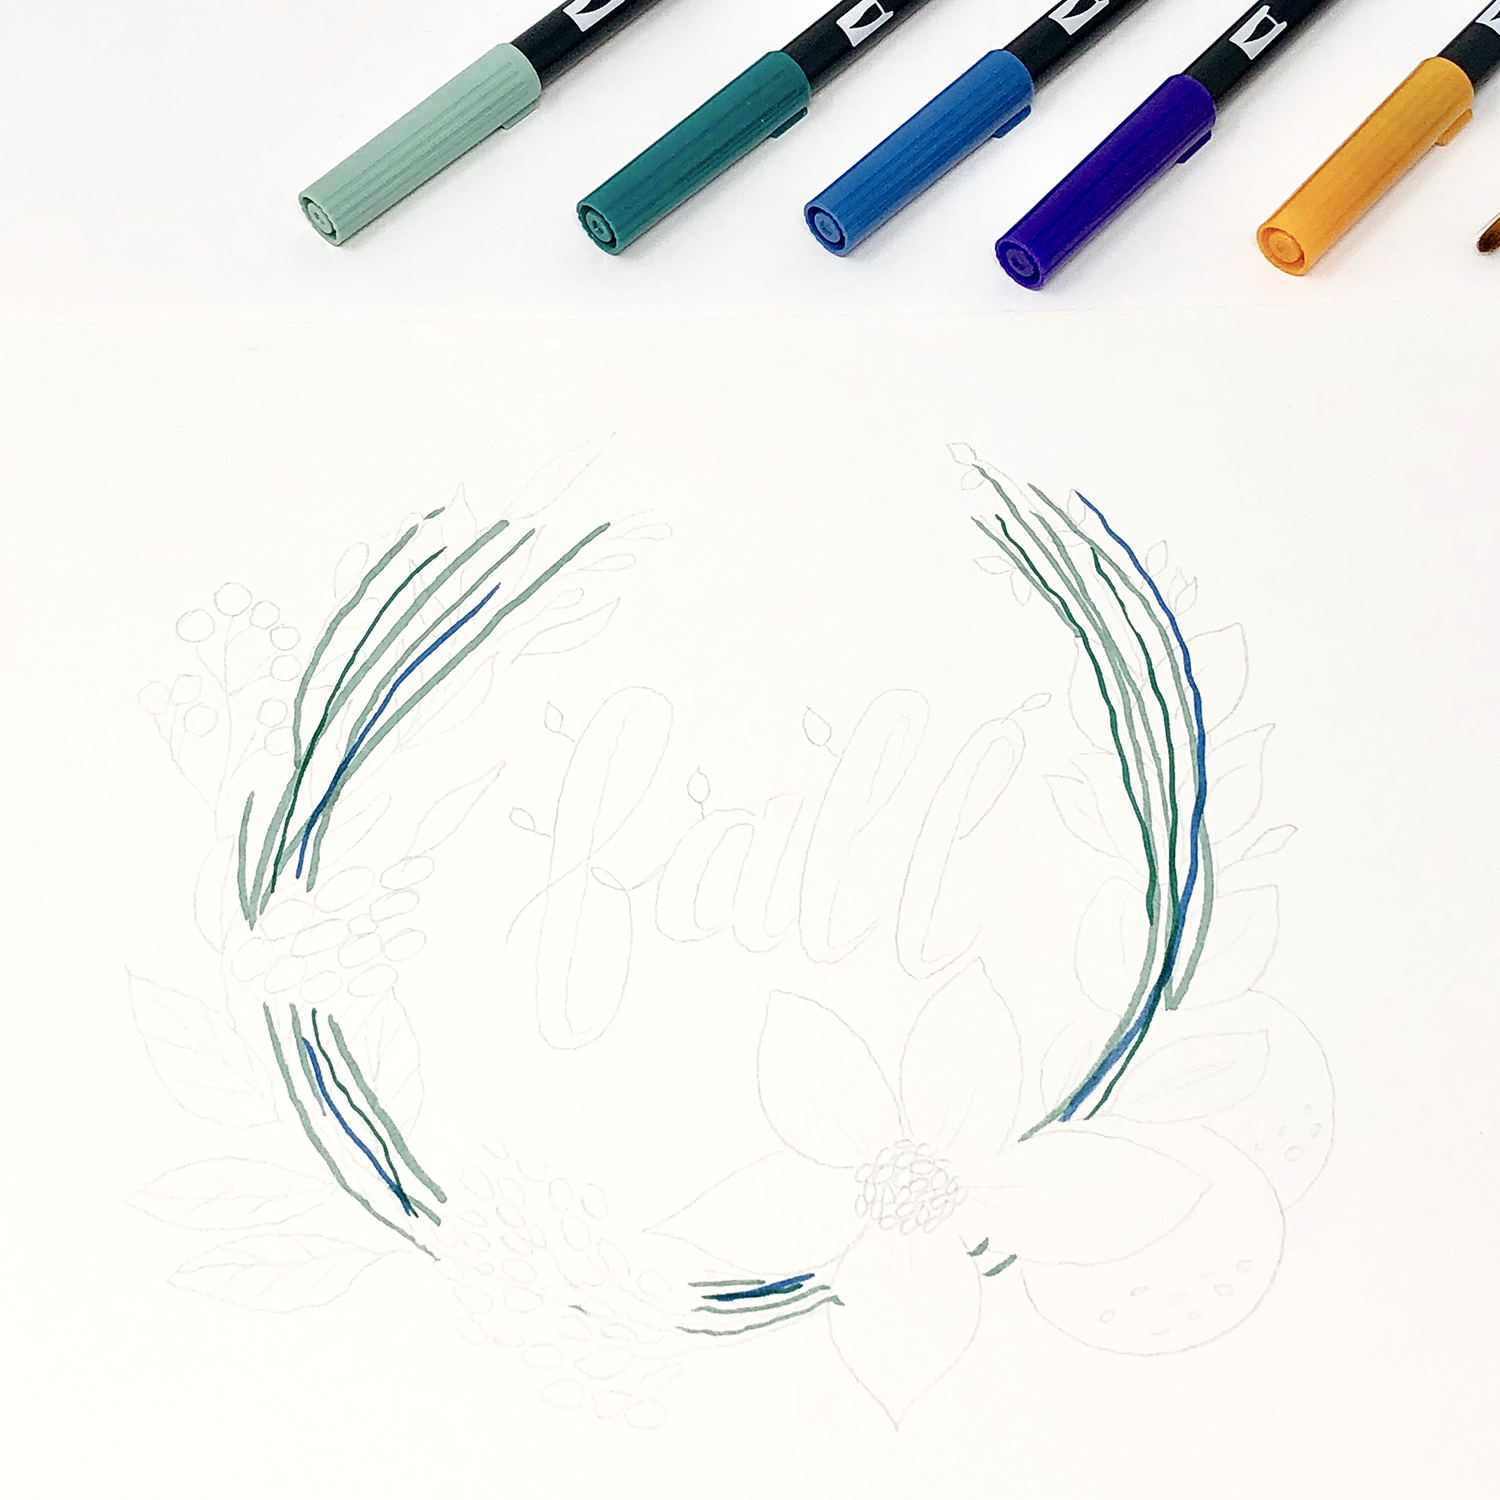 Draw a Fall Wreath in Jewel Tones by Jessica Mack on behalf of Tombow